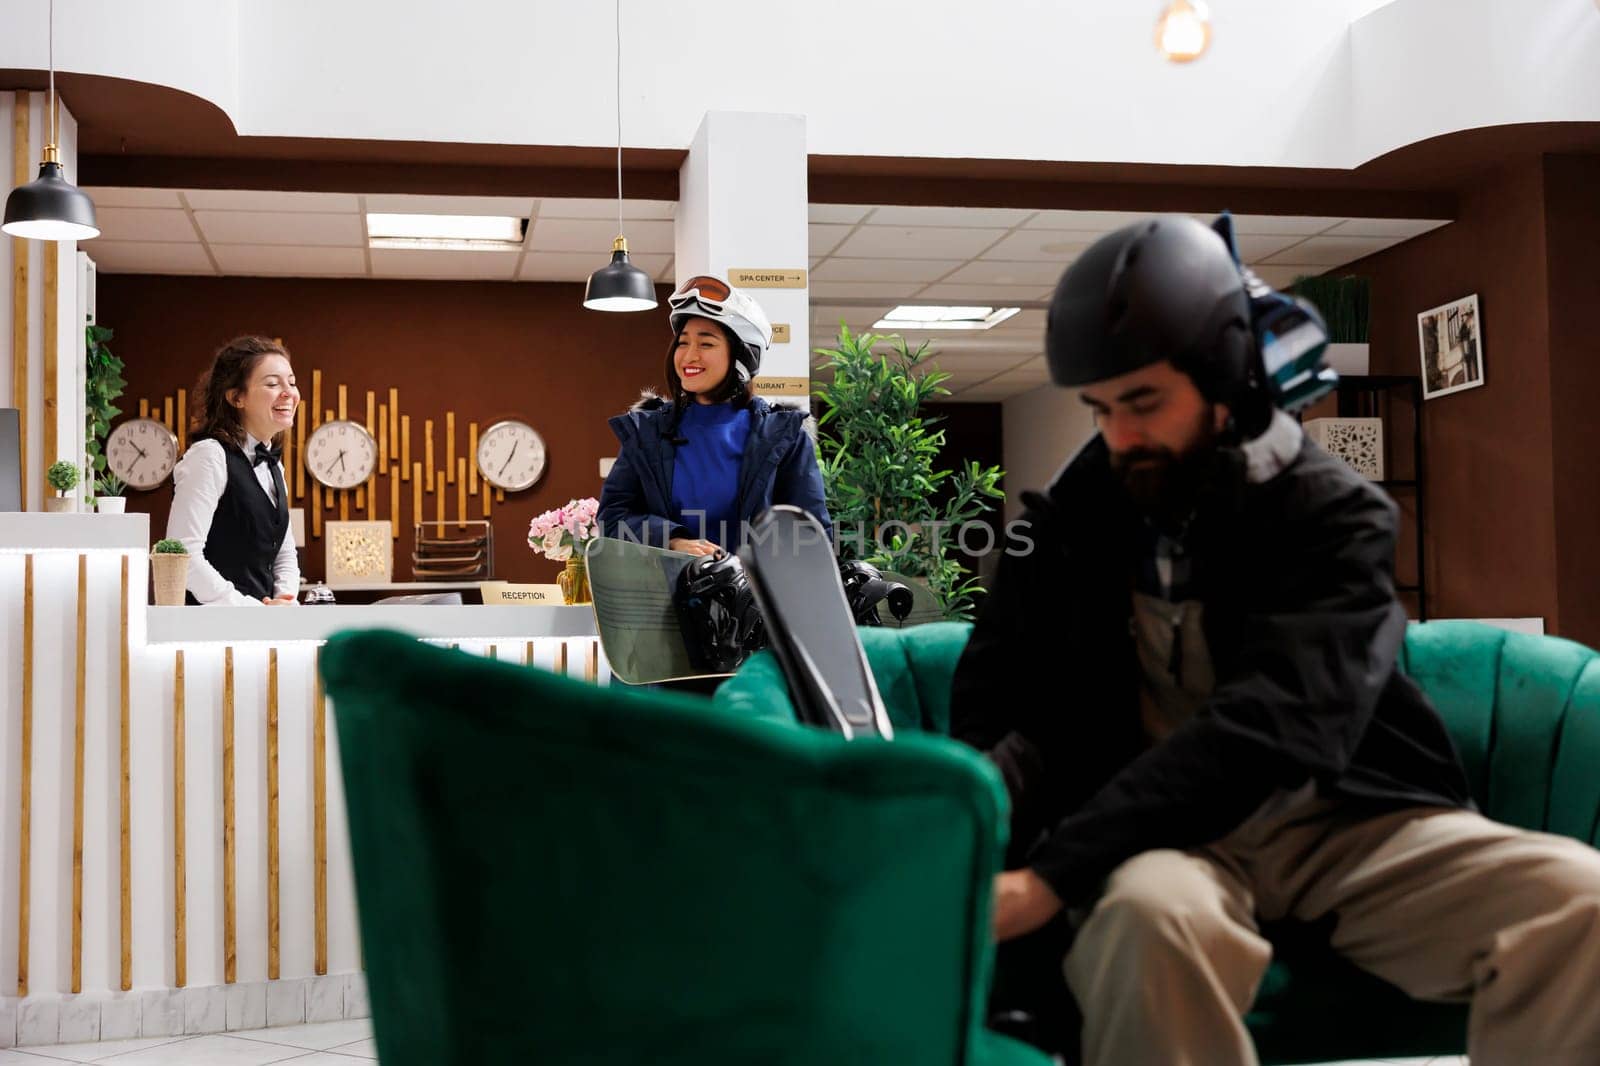 Travellers with winter gear in reception by DCStudio